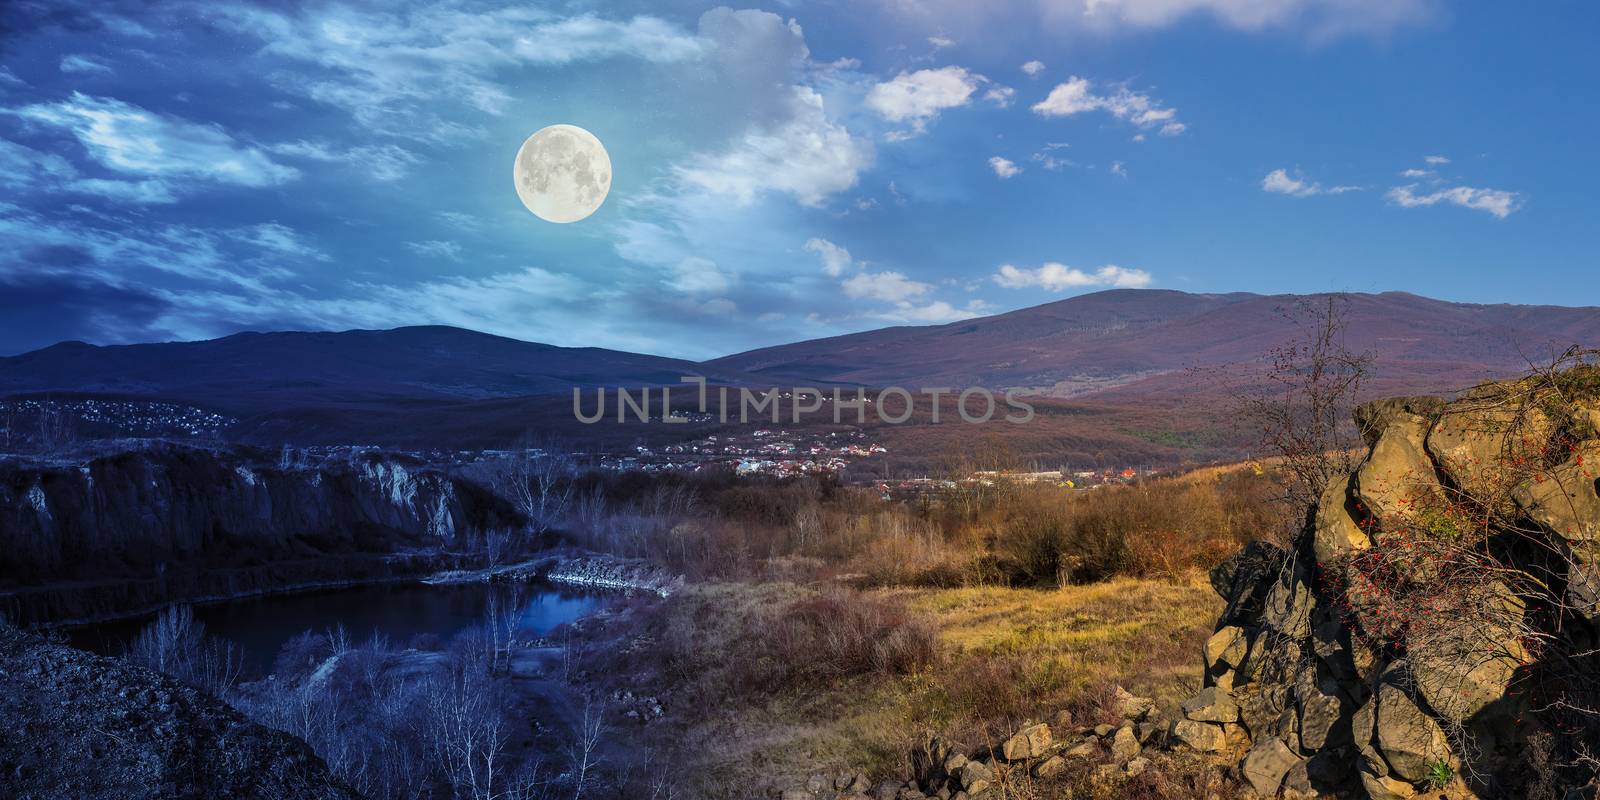 day and night collage of small lake in an abandoned stone quarry in the mountains outside the city with full moon